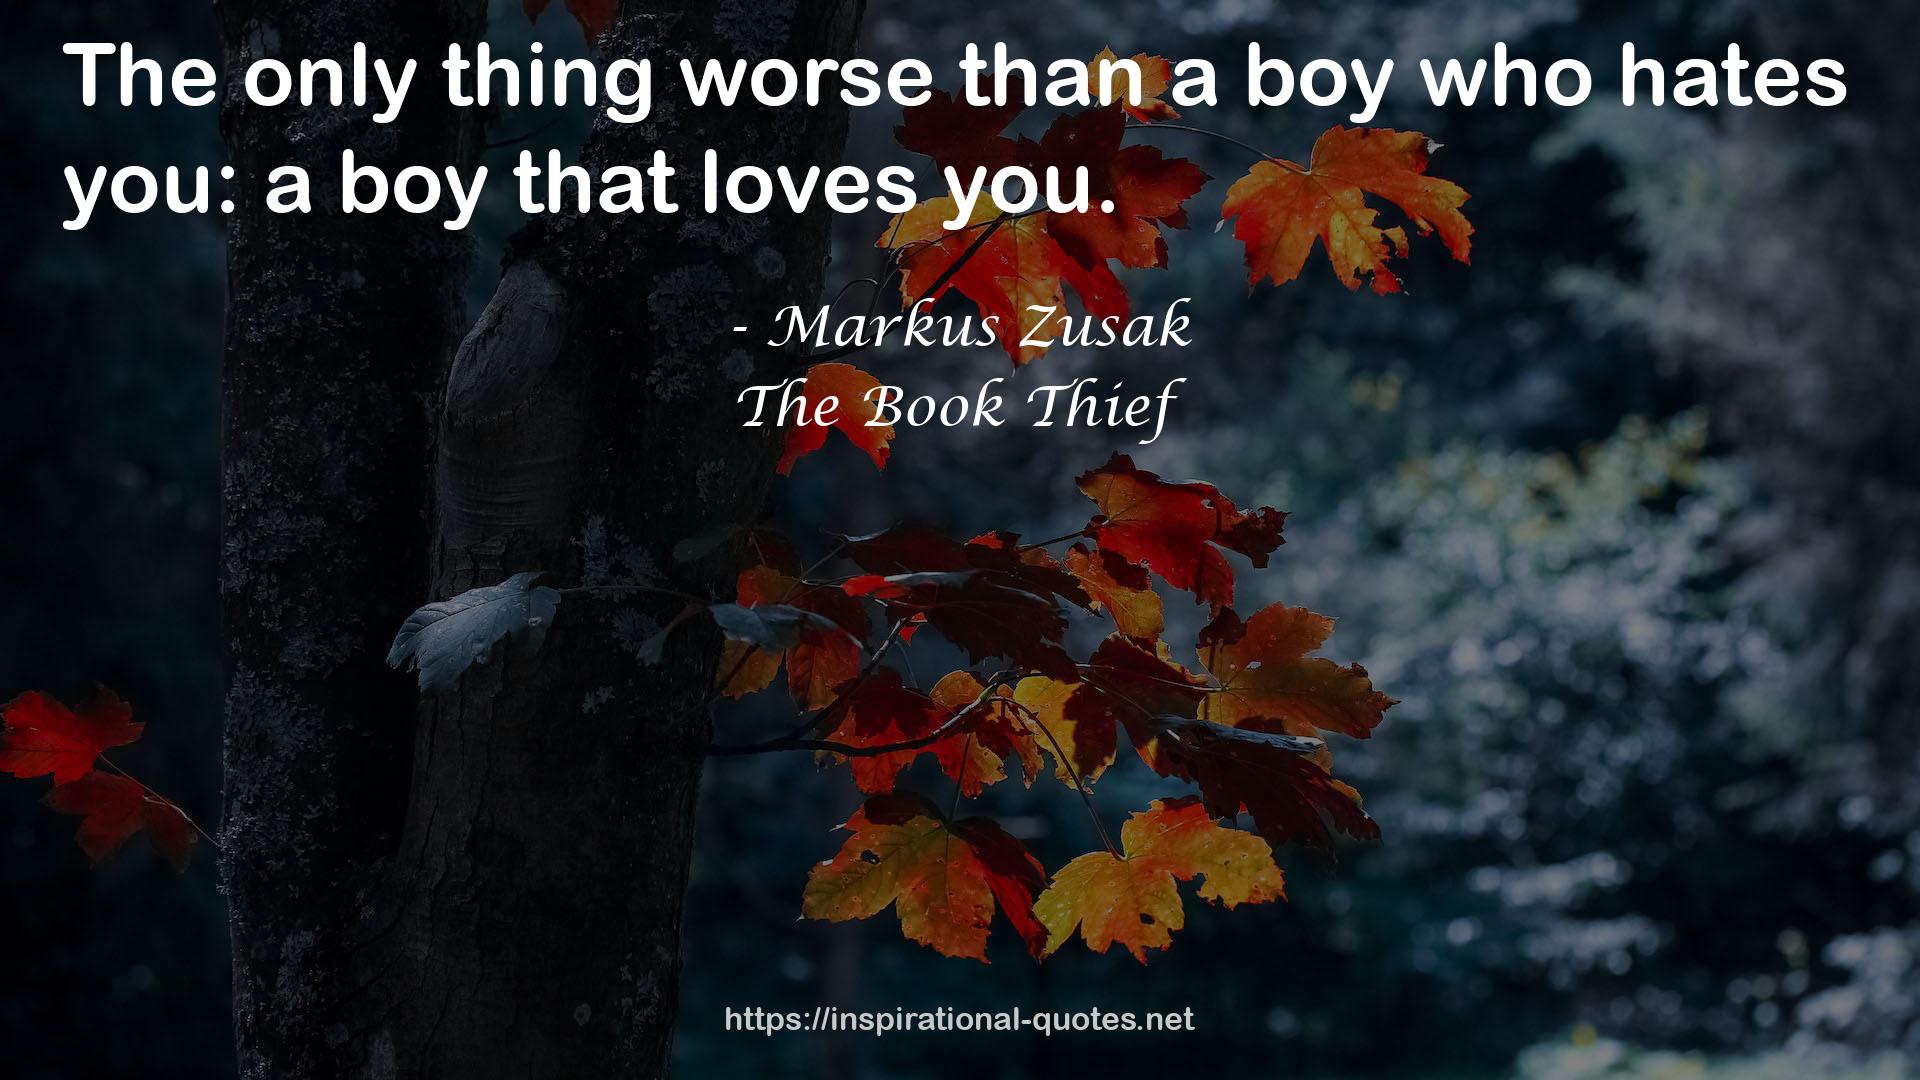 The Book Thief QUOTES